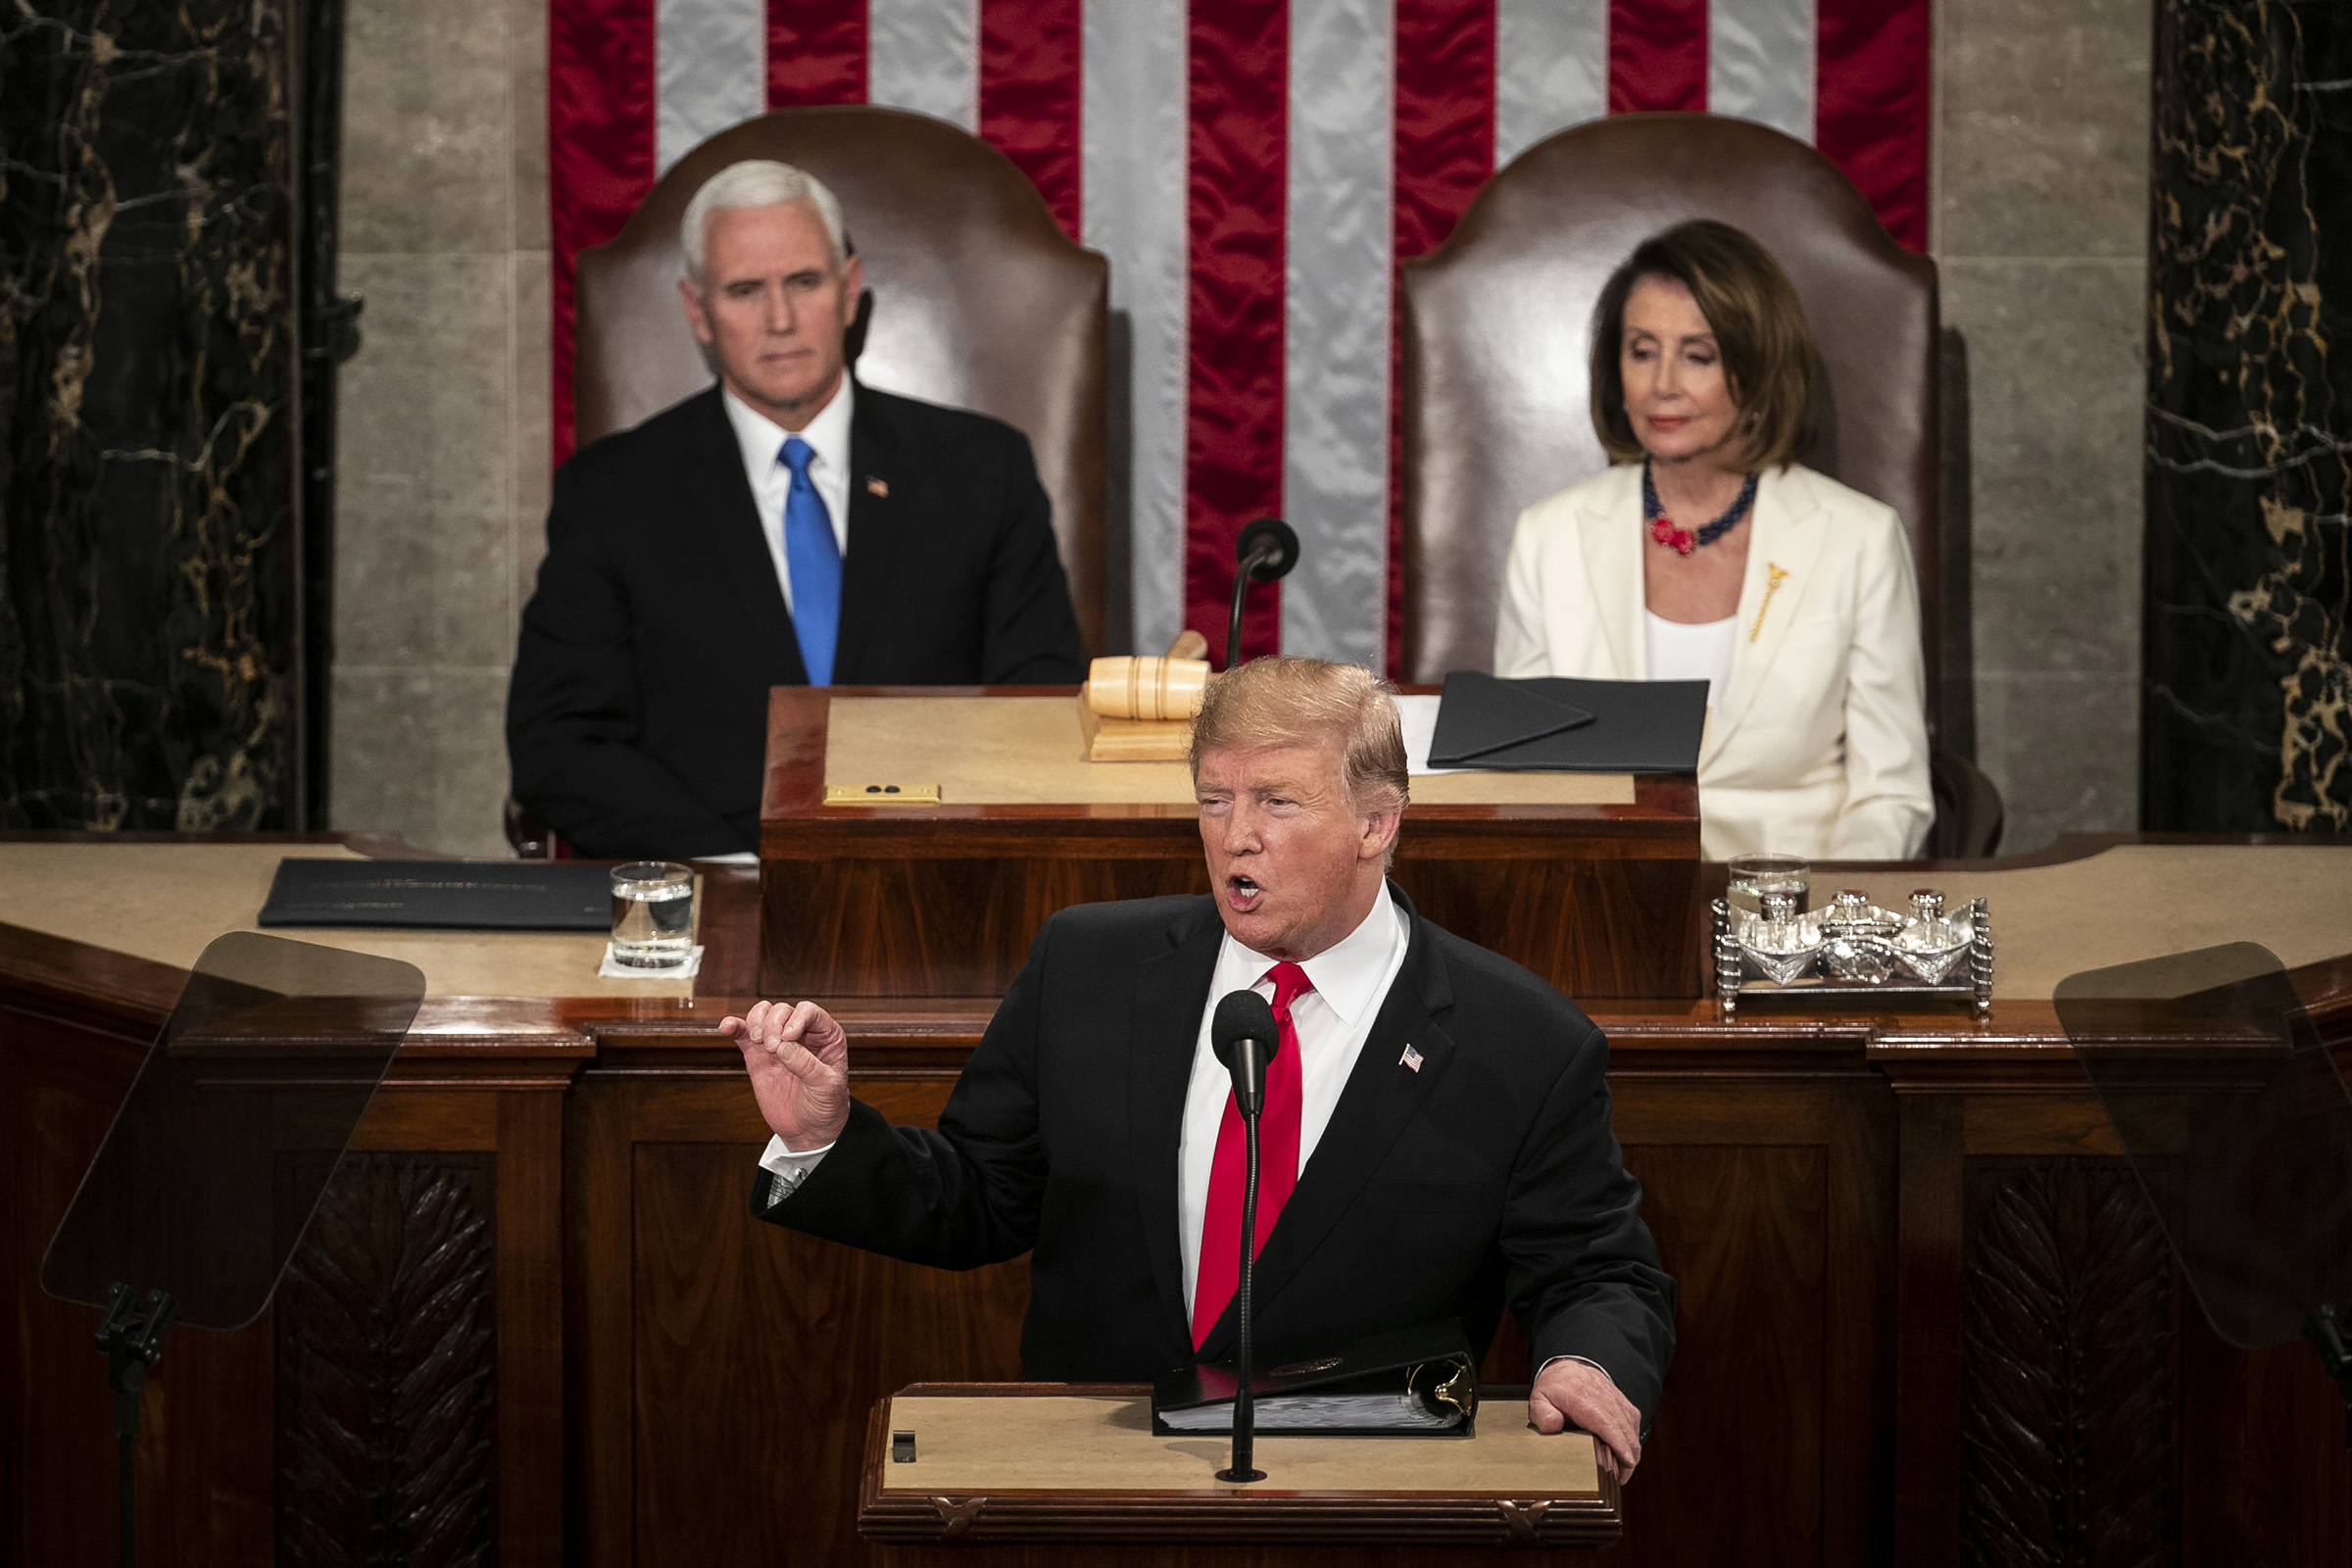 President Donald Trump delivers a State of the Union address to a joint session of Congress at the U.S. Capitol in Washington, D.C., on Feb. 5, 2019. (Al Drago—Bloomberg/Getty Images)